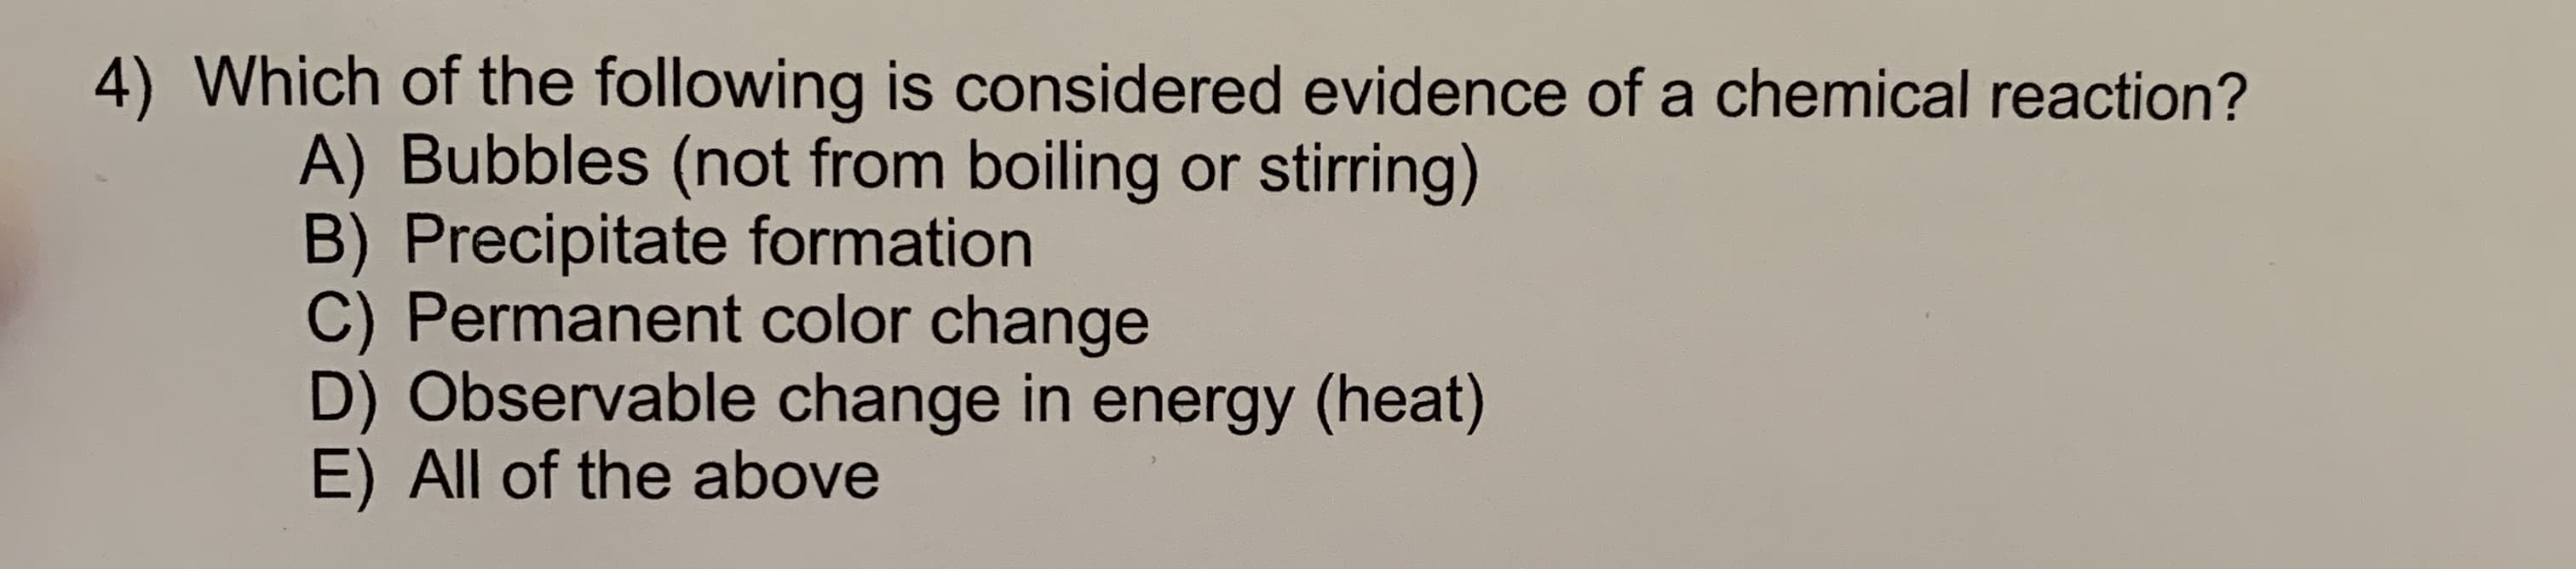 4) Which of the following is considered evidence of a chemical reaction?
A) Bubbles (not from boiling or stirring)
B) Precipitate formation
C) Permanent color change
D) Observable change in energy (heat)
E) All of the above
